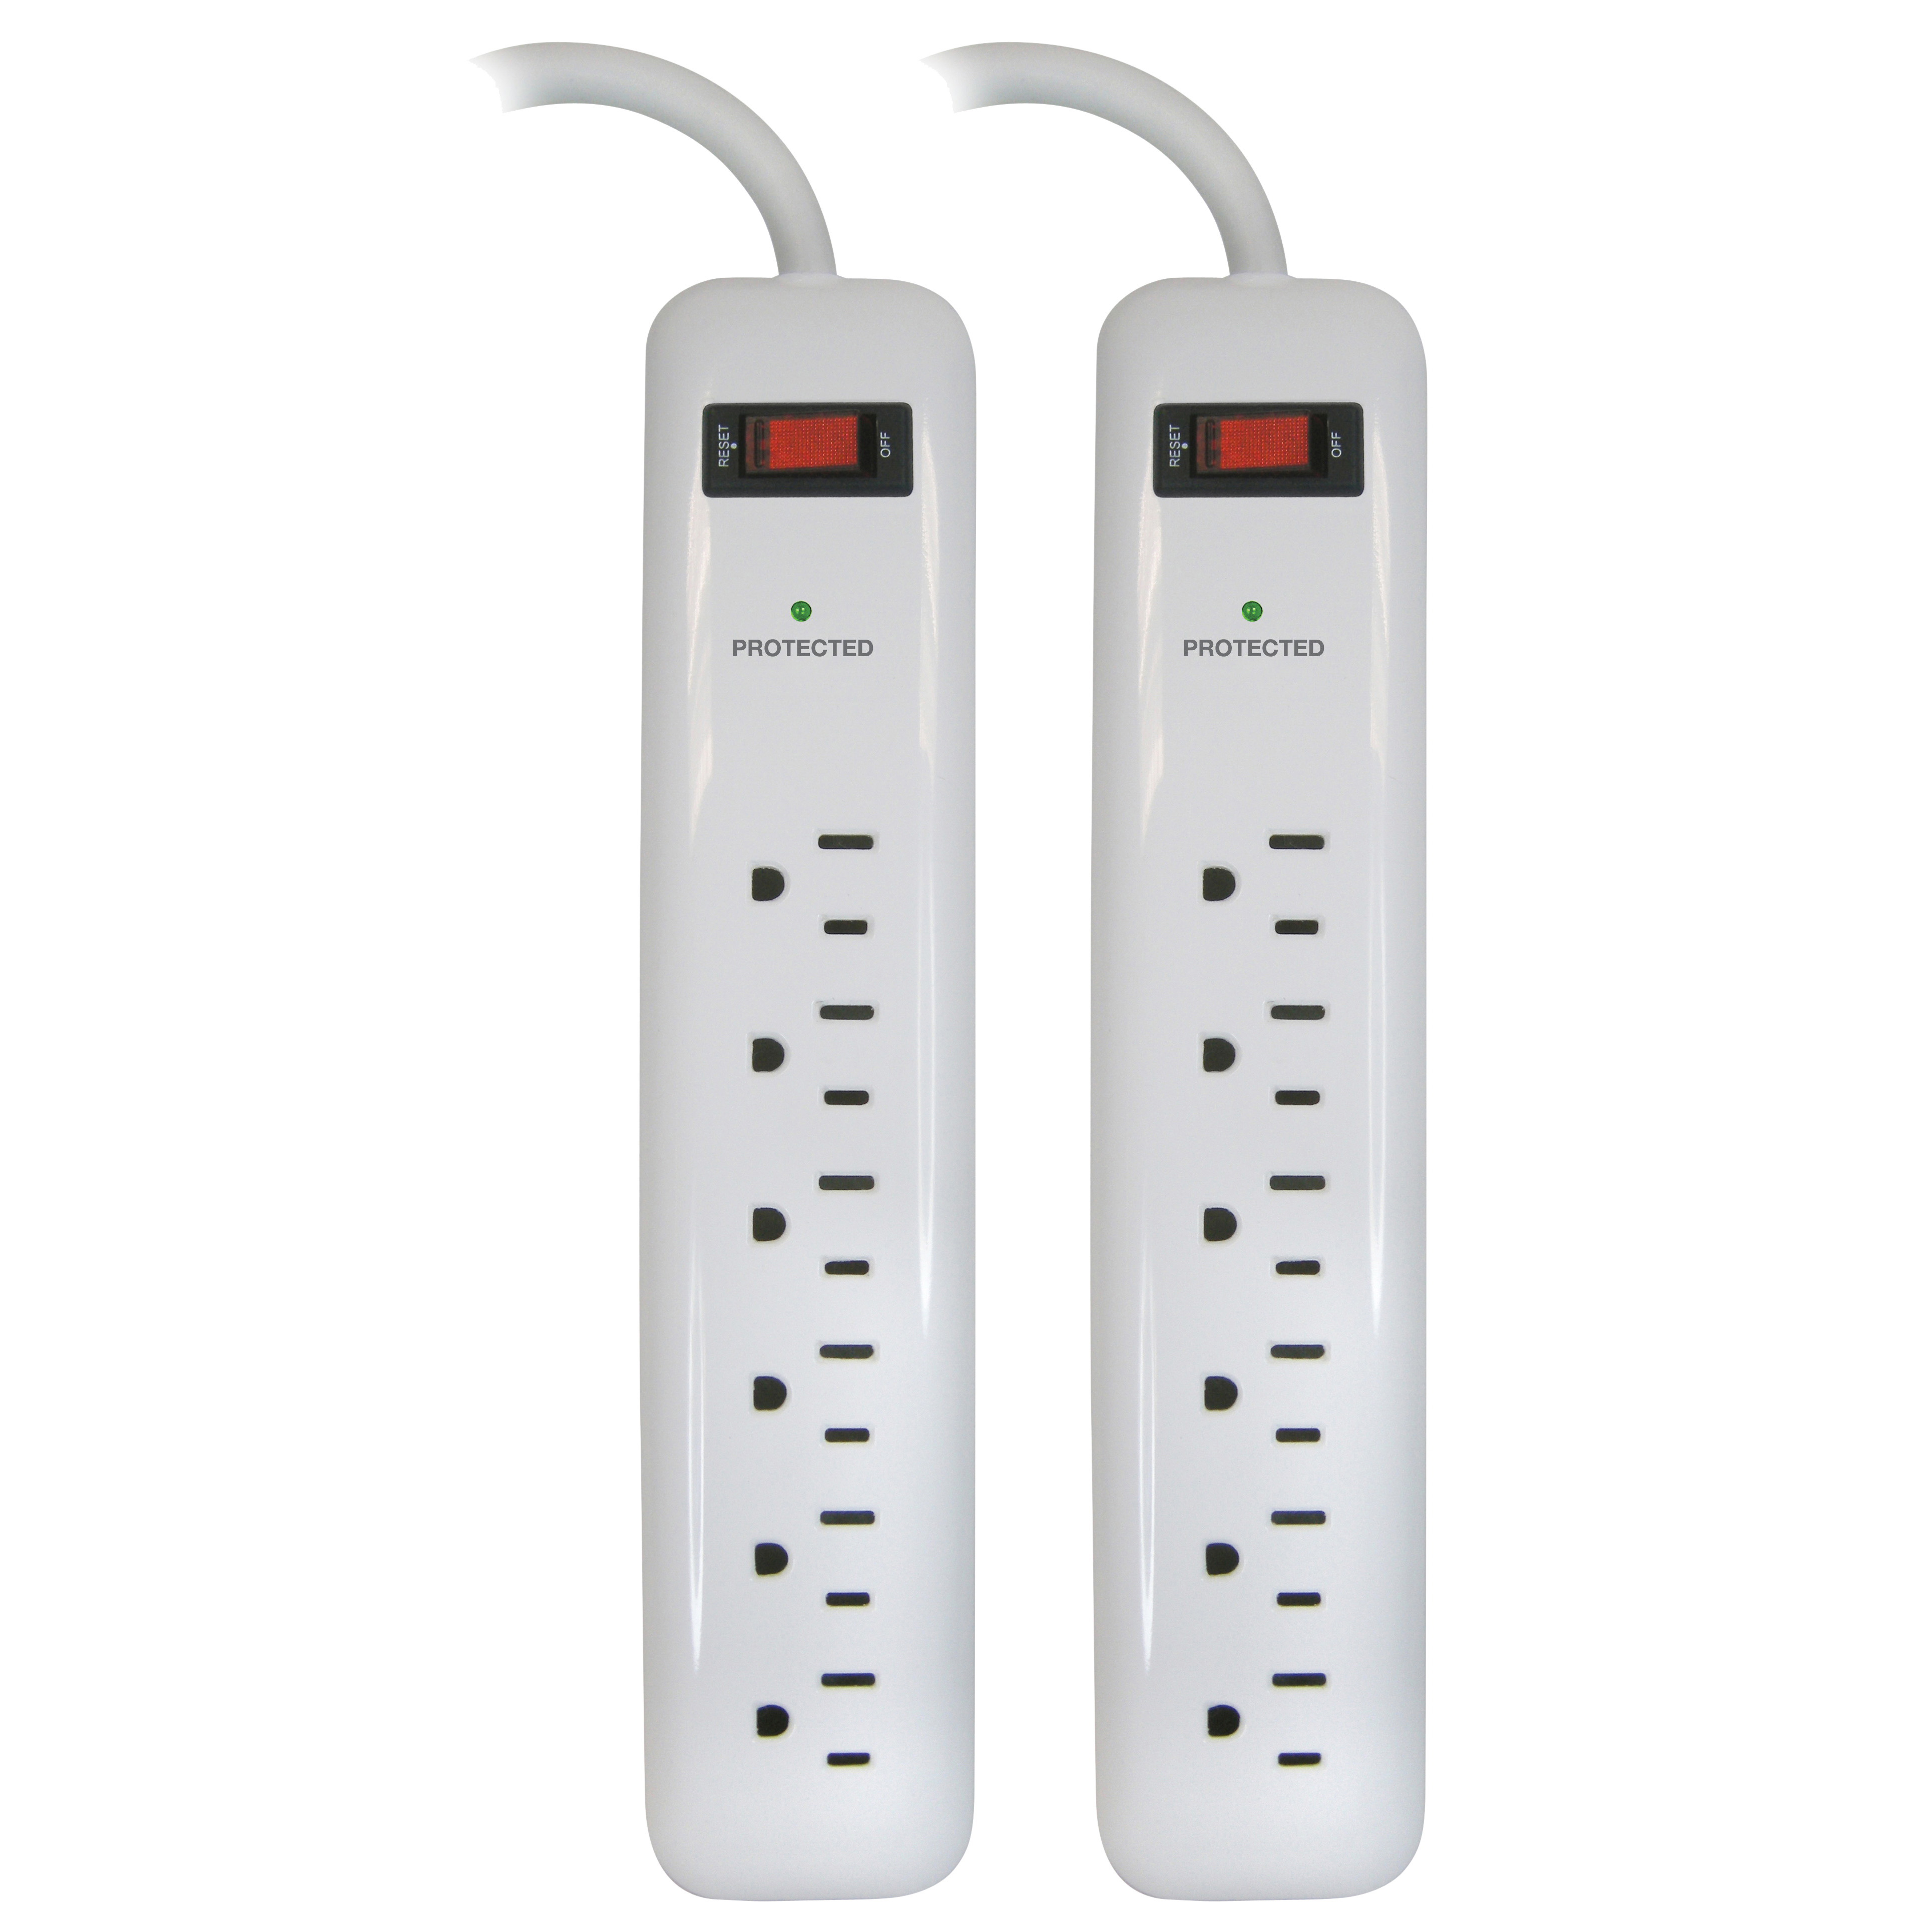 OR2013X2 Surge Protector